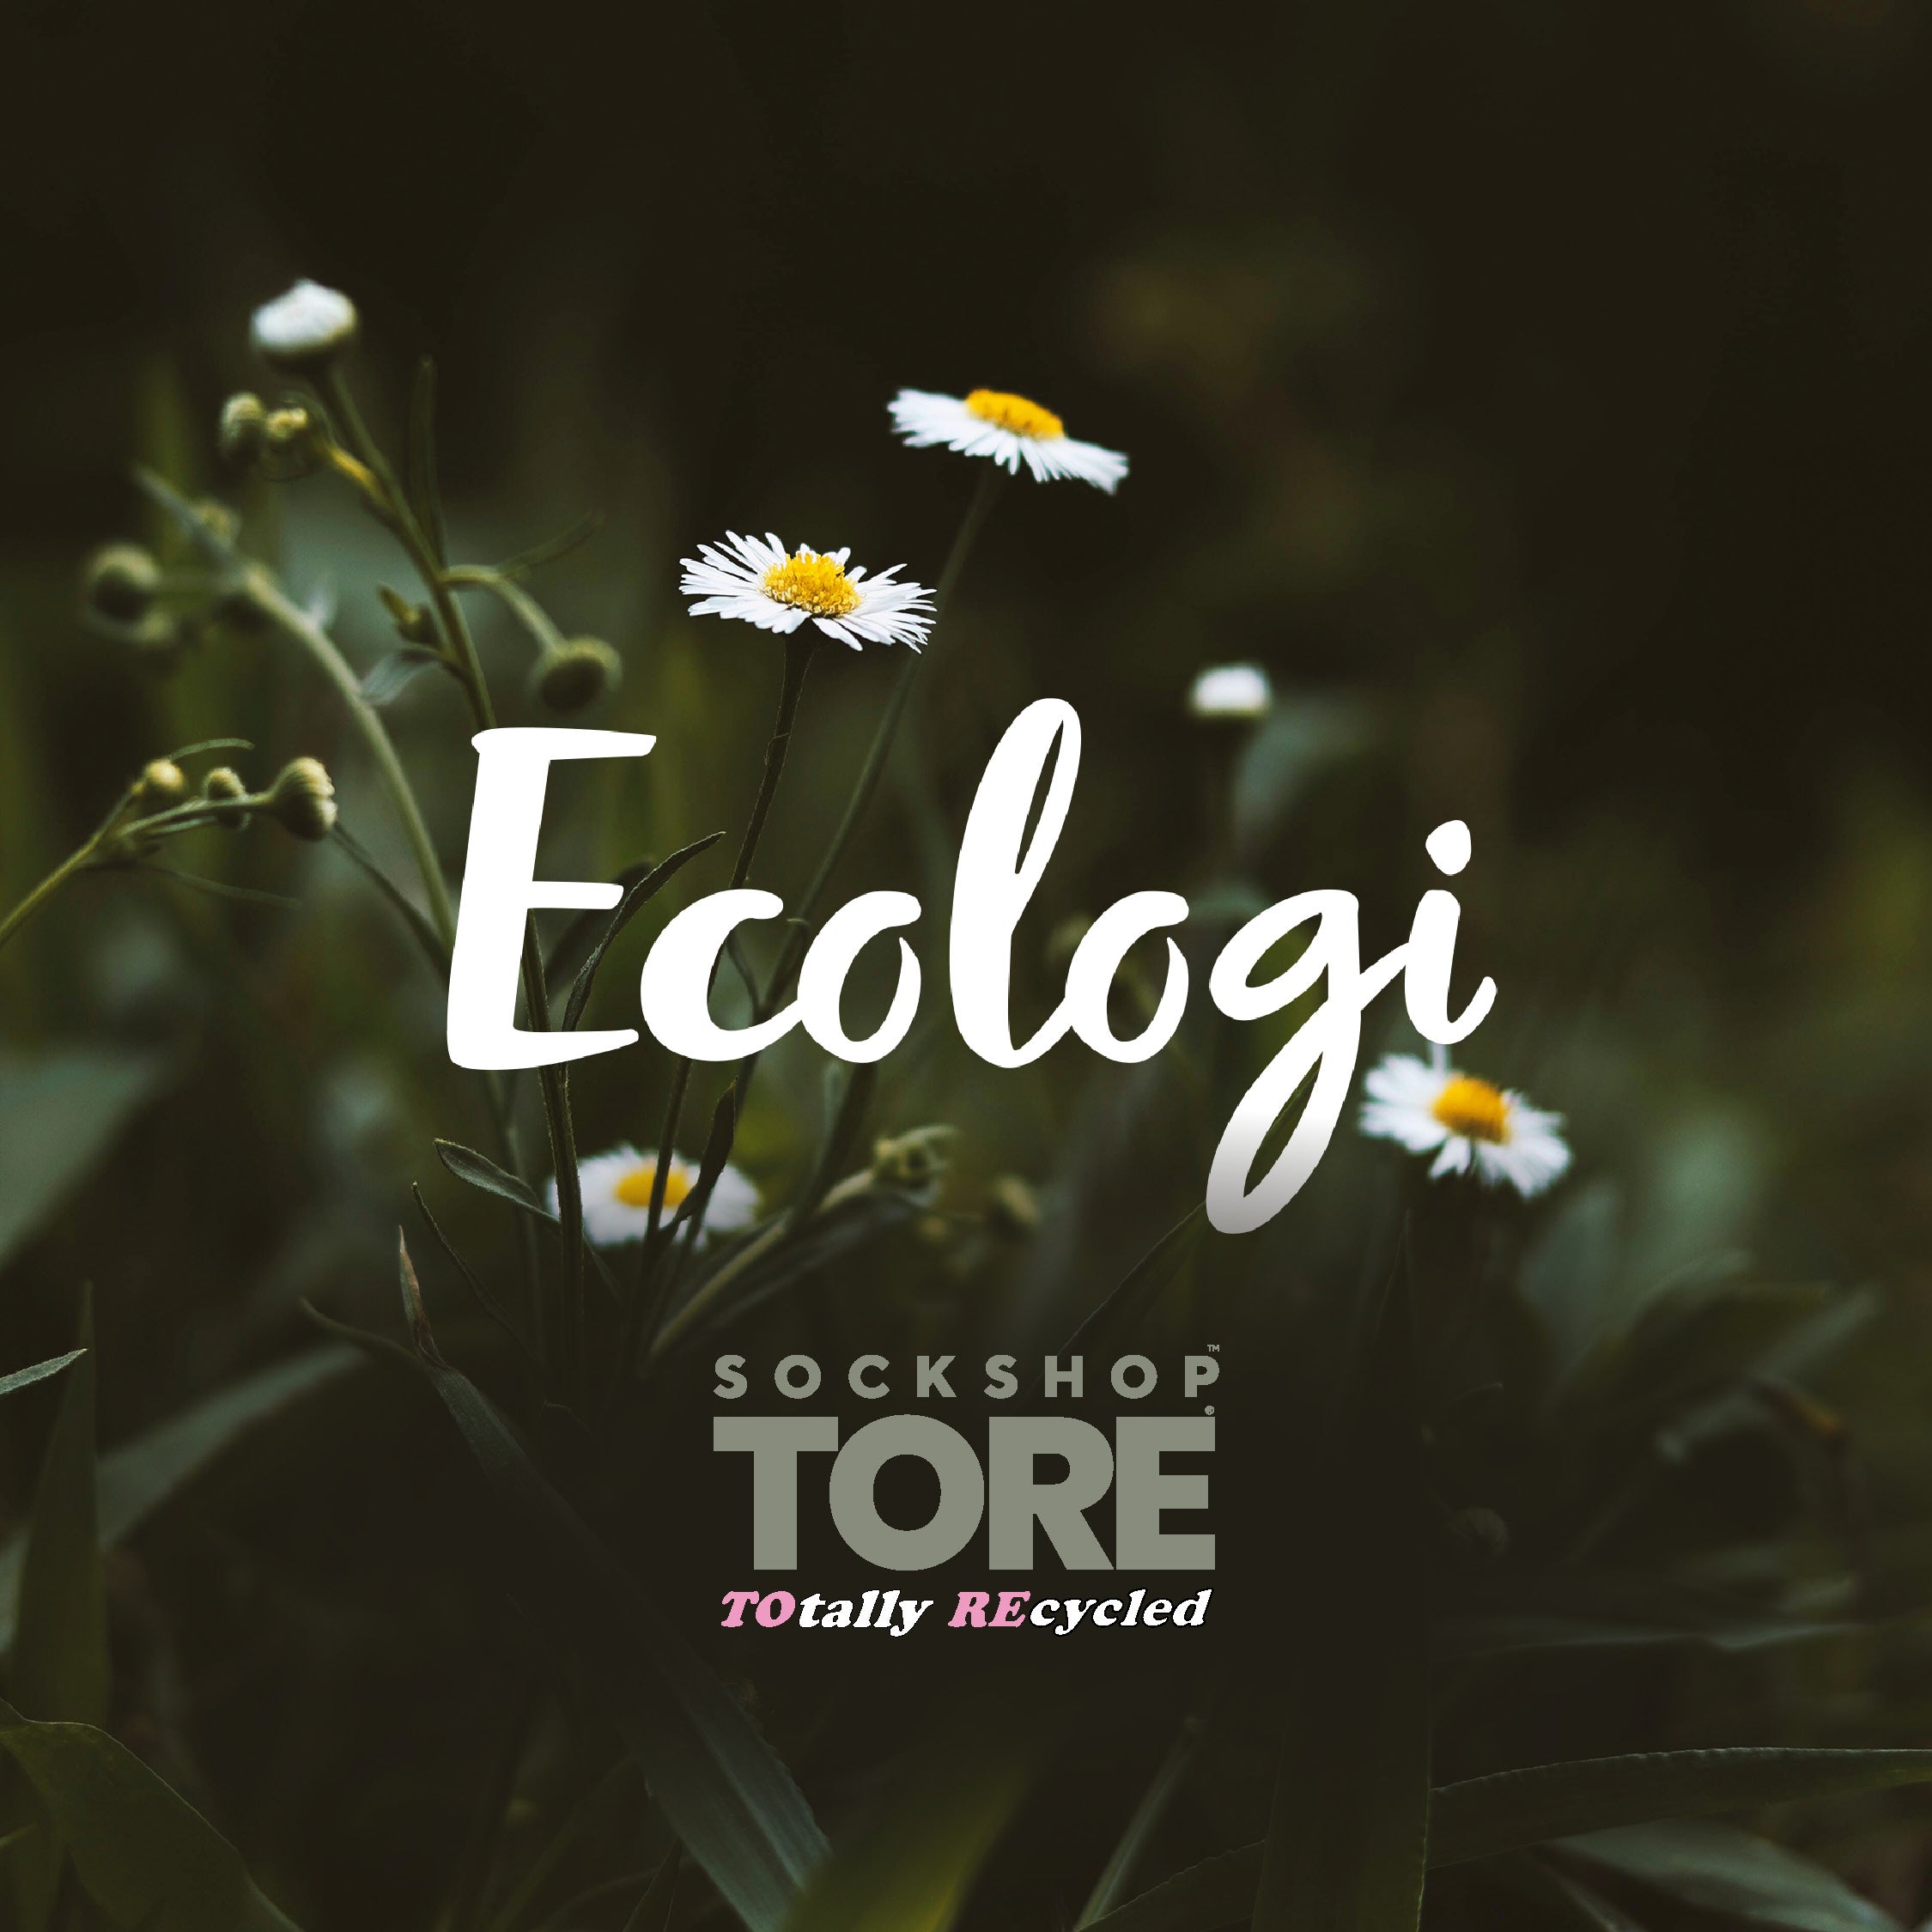 Tore Socks partners up with Ecologi